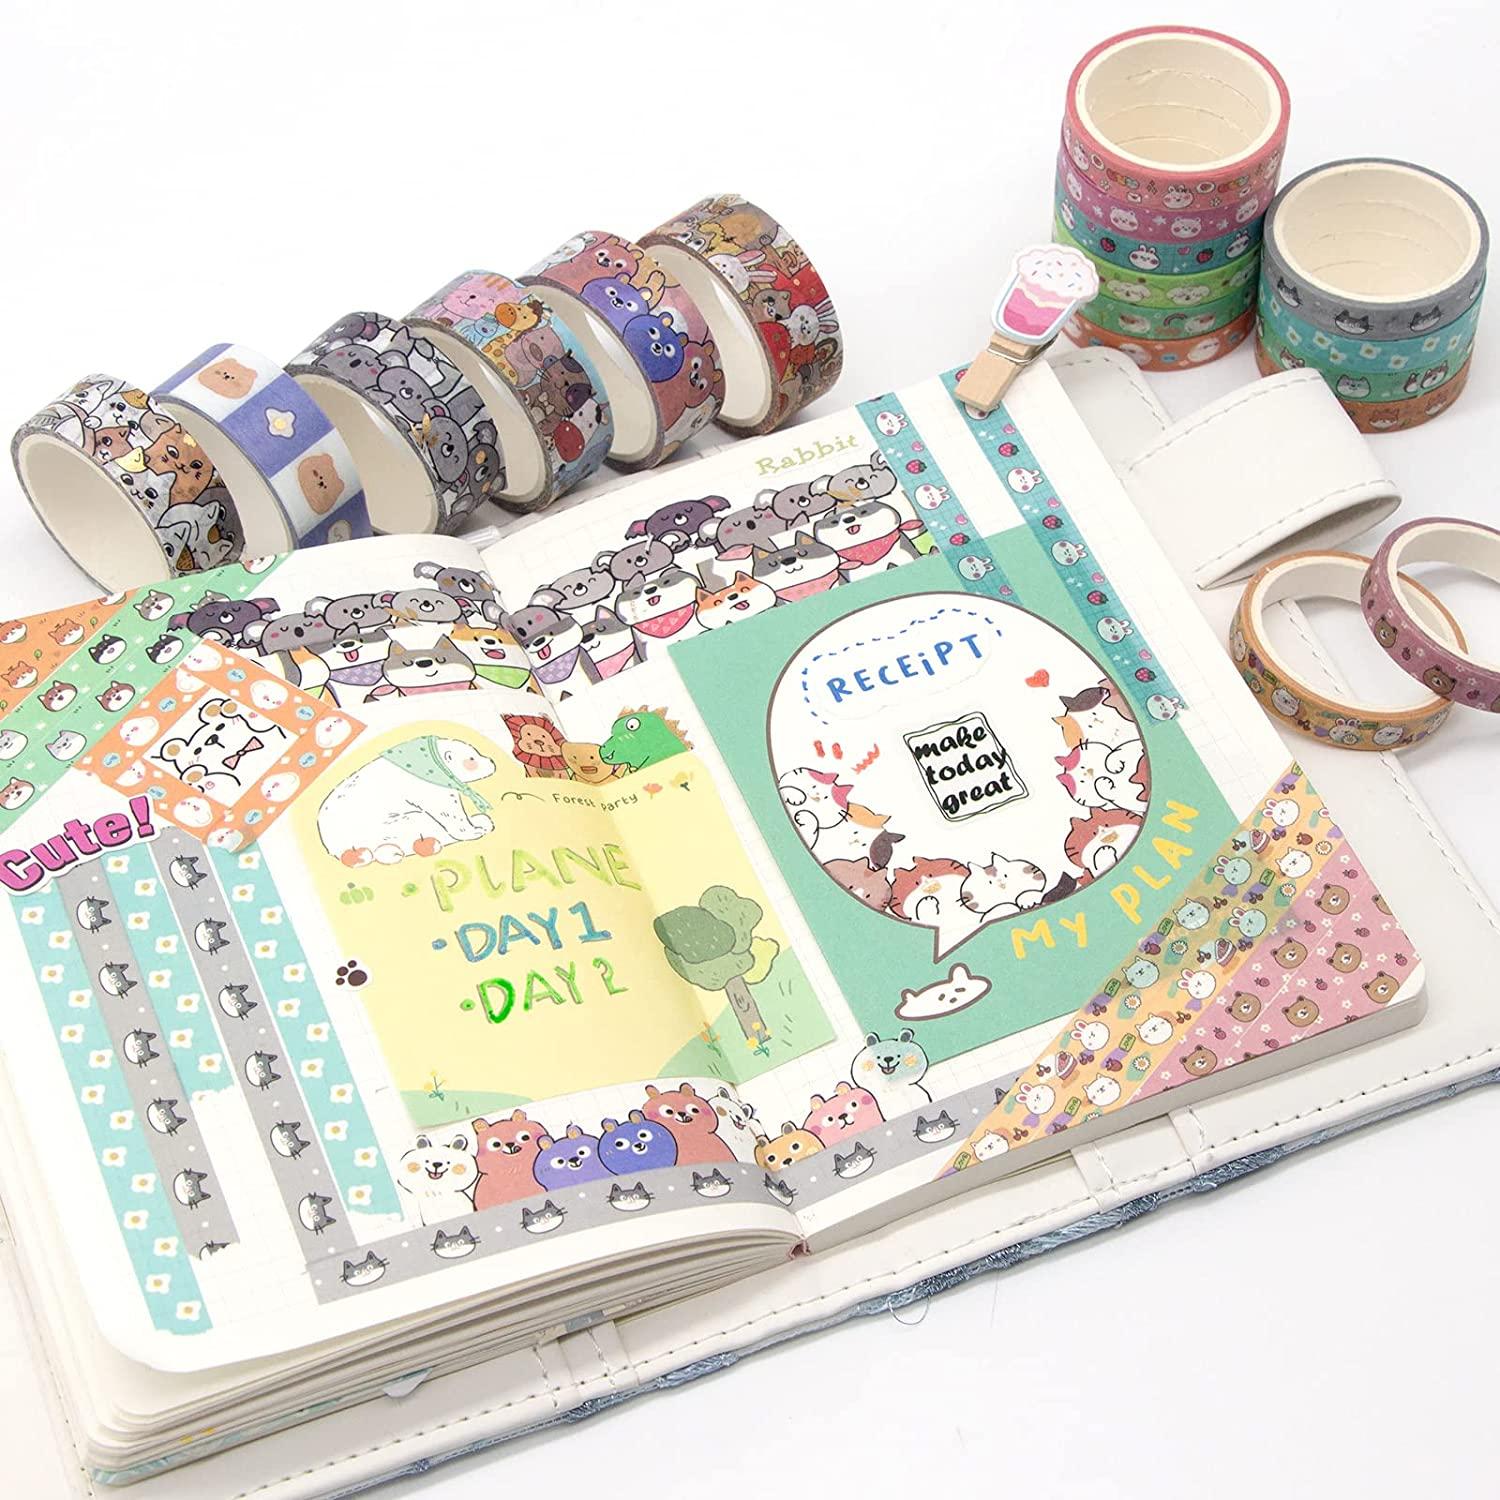 Cute Washi Tape Set & Stickers For Children's Diy Crafts, Clear